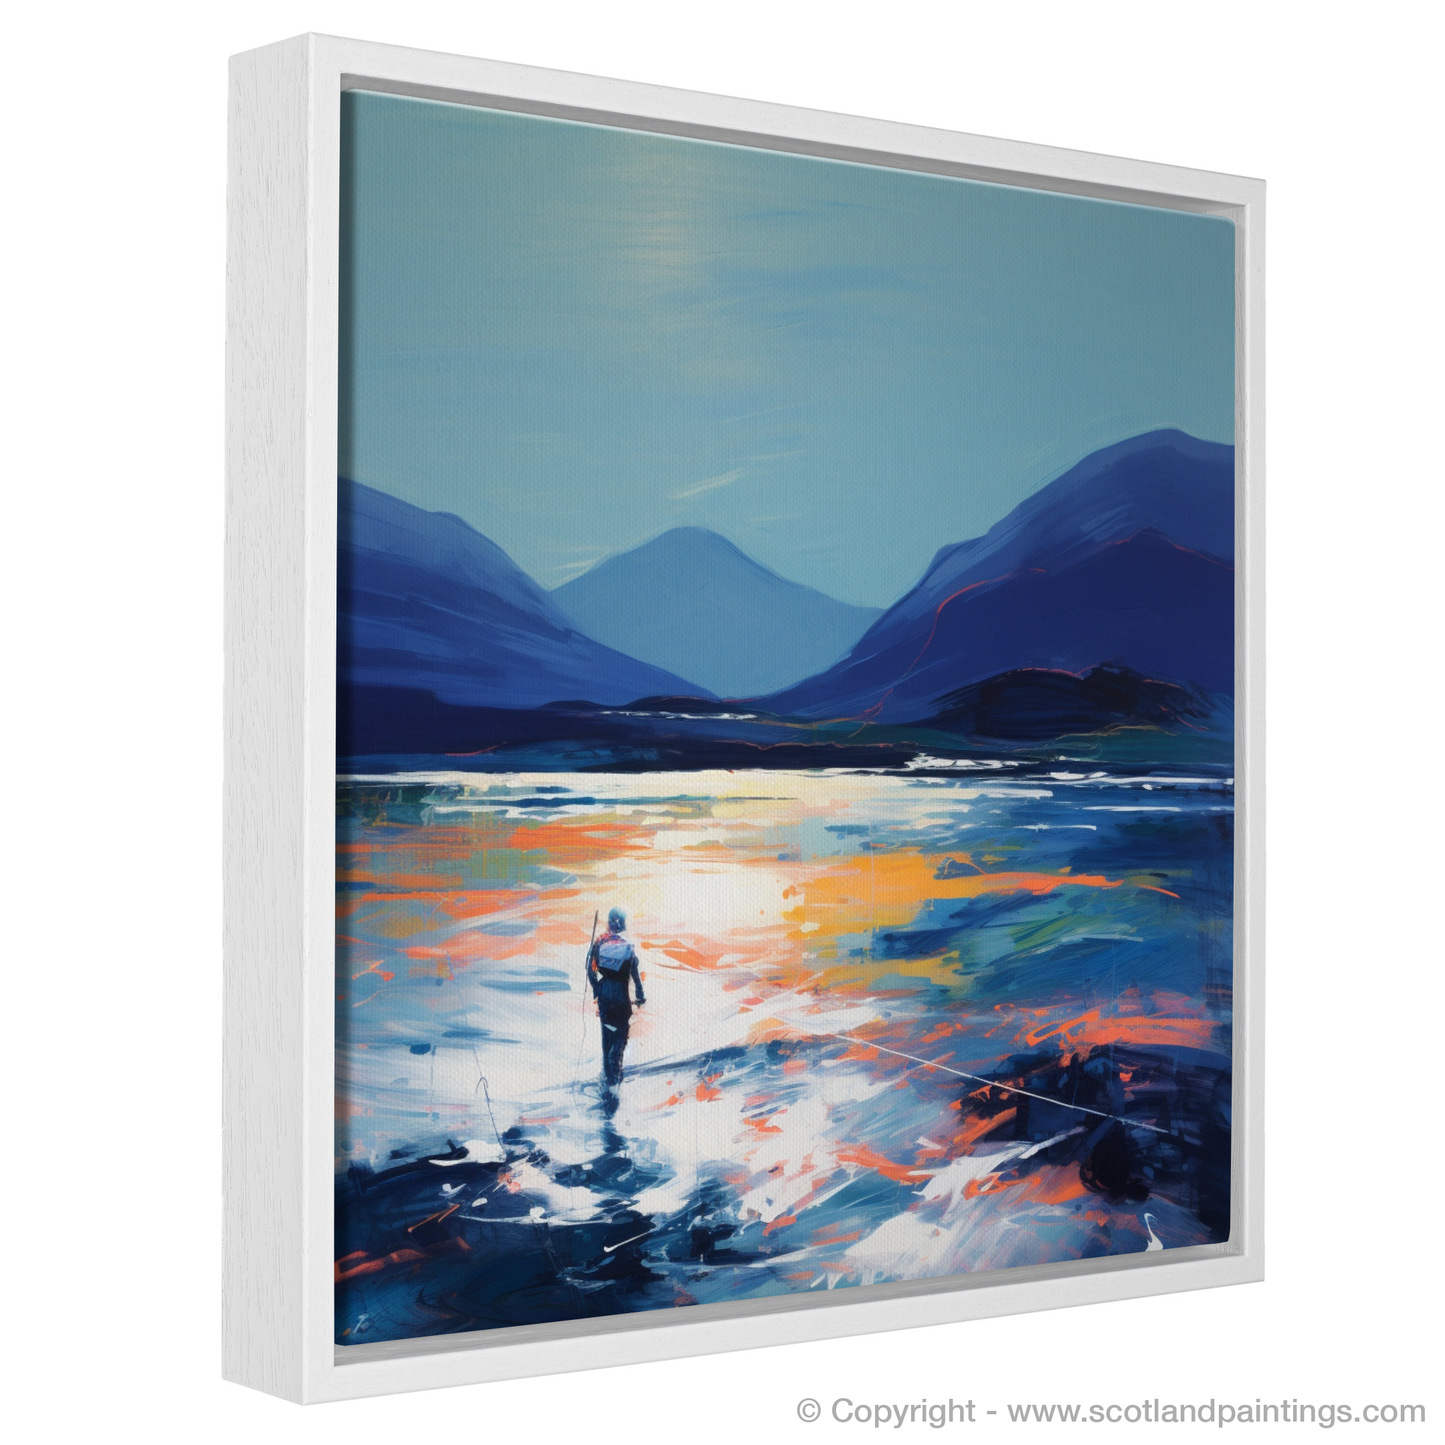 Solitude at Sunset: A Contemporary Vision of Fly Fishing in Loch Sunart